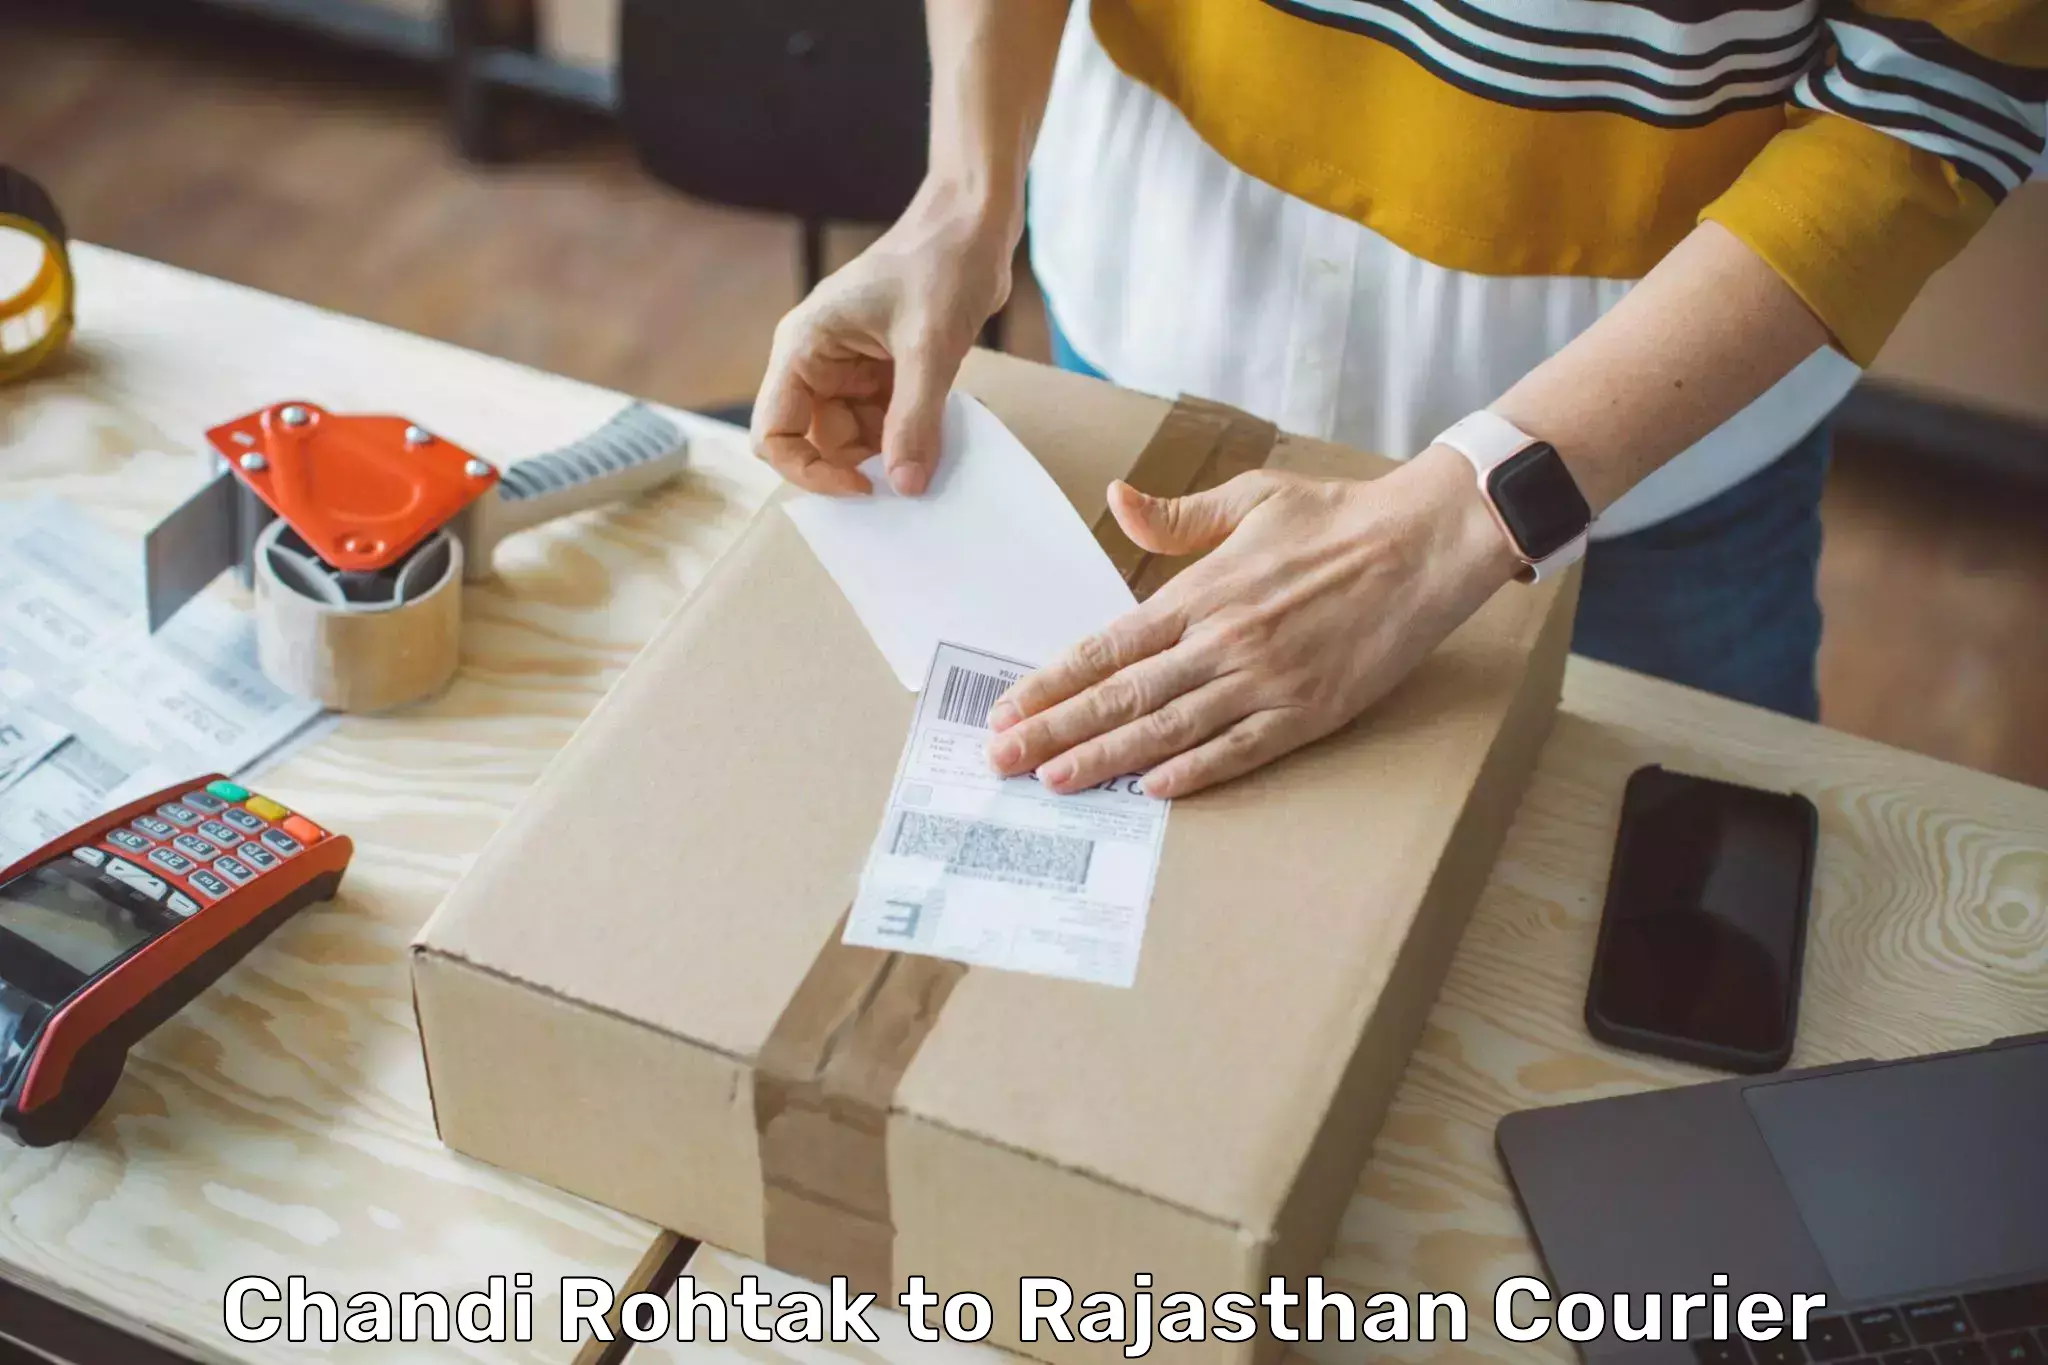 Courier service partnerships Chandi Rohtak to Rajasthan